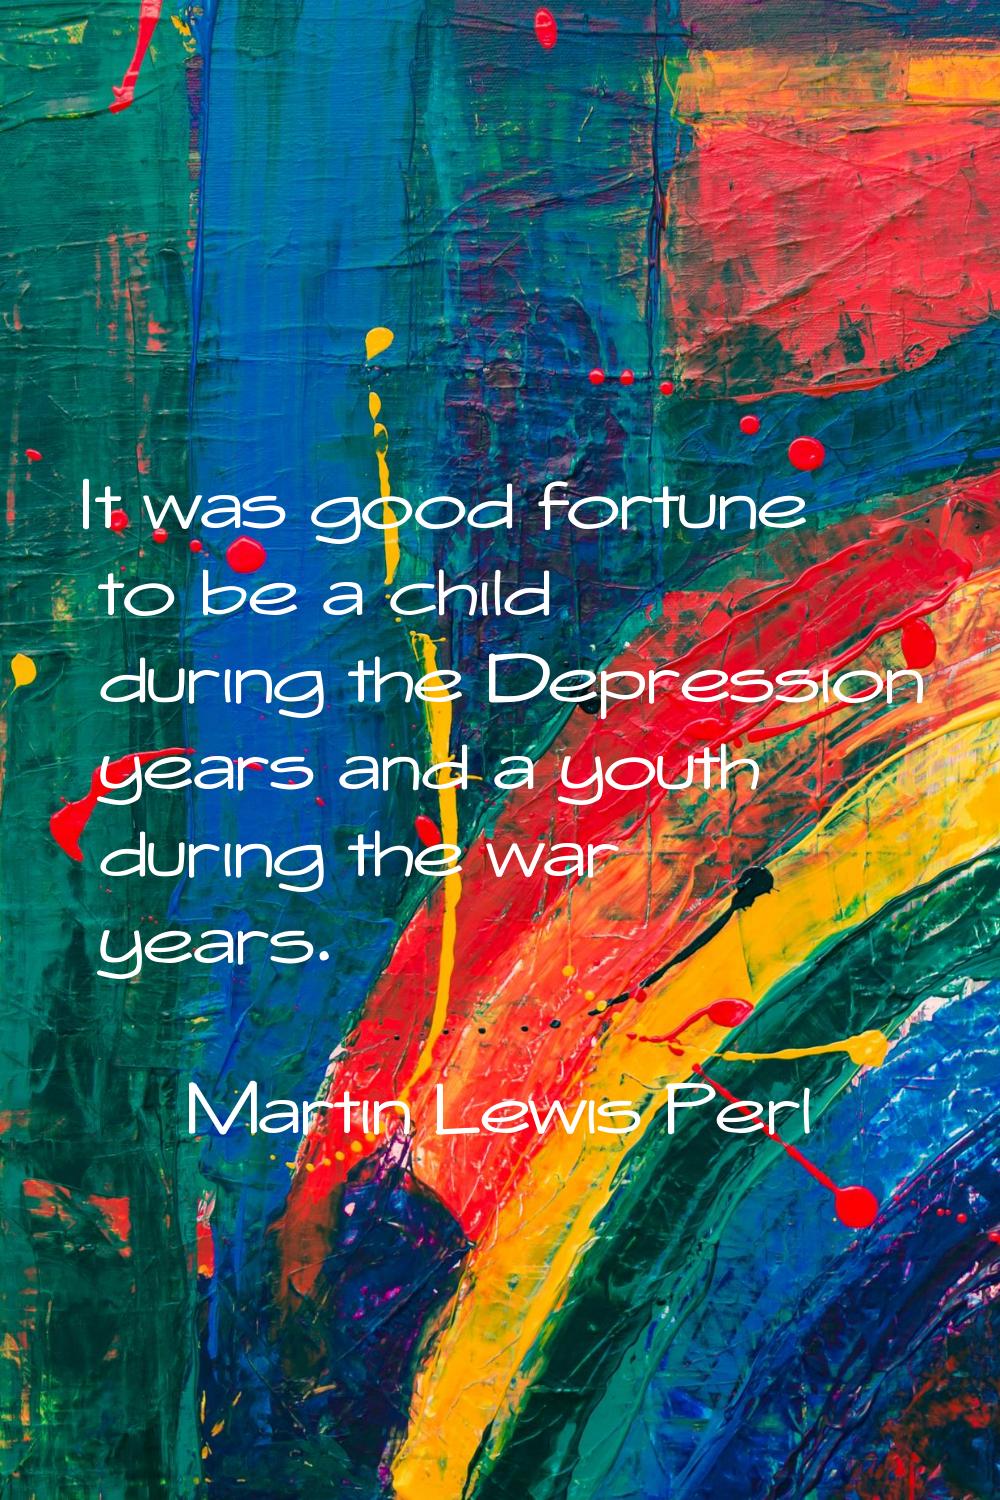 It was good fortune to be a child during the Depression years and a youth during the war years.